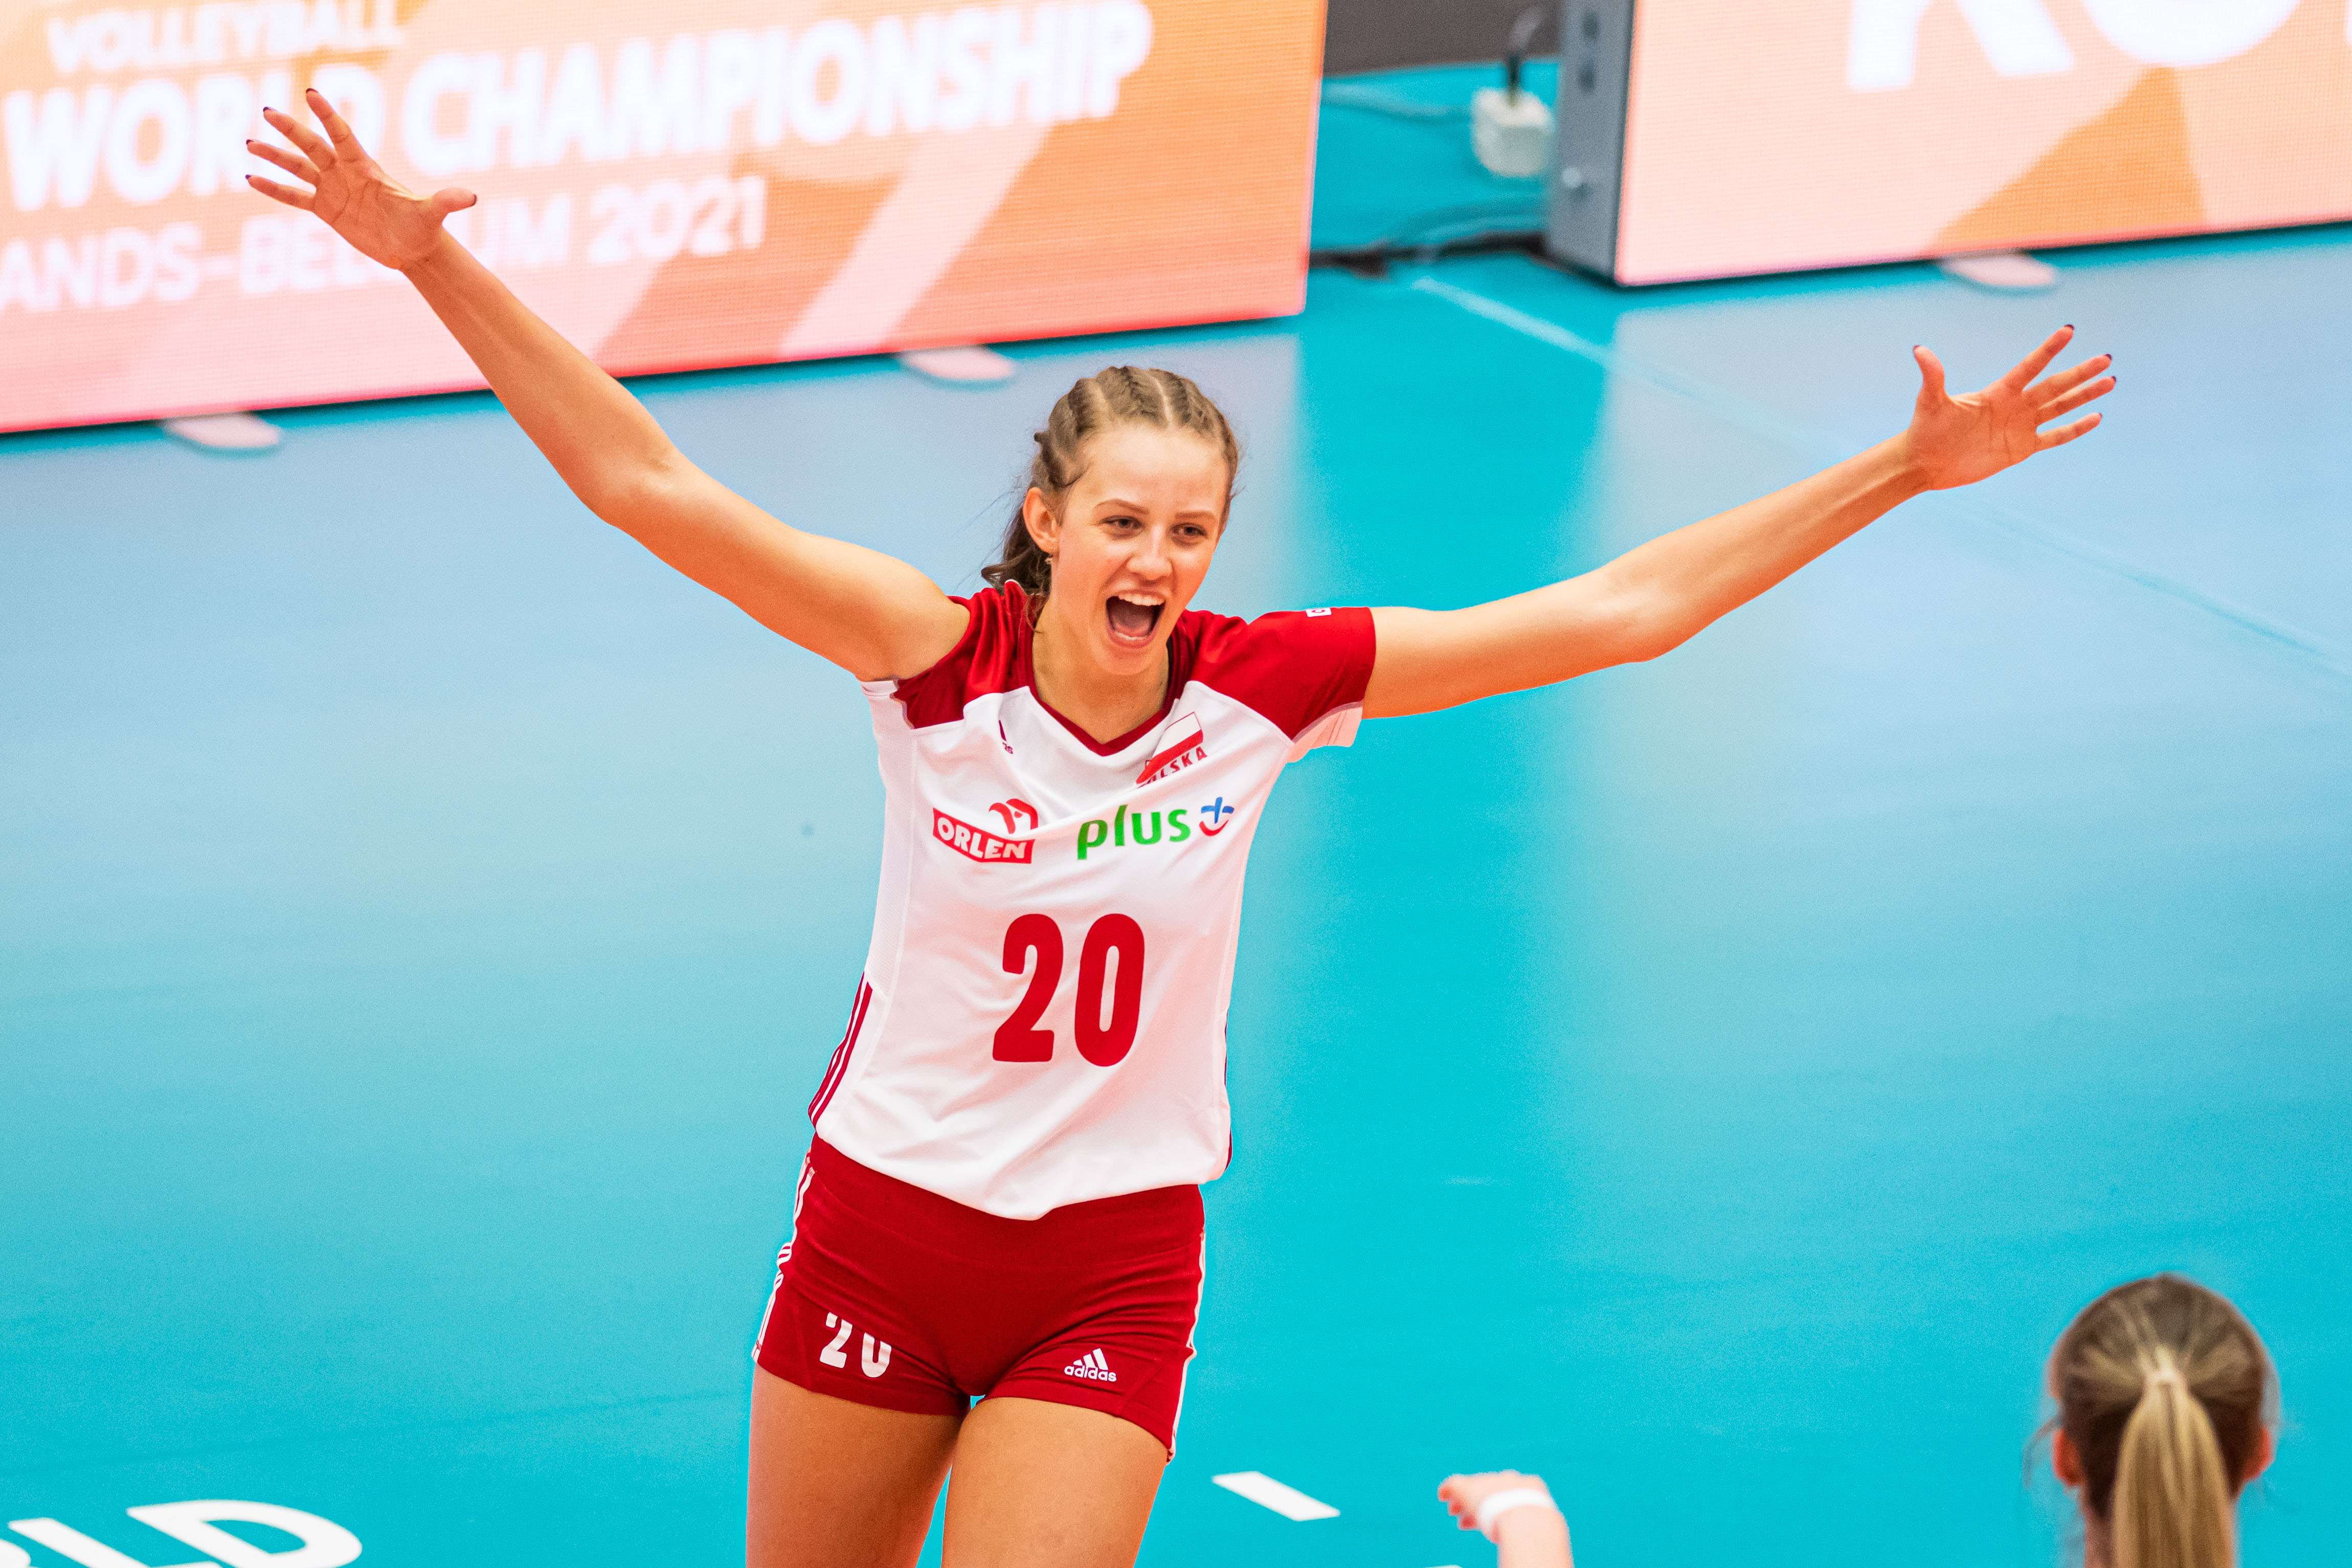 Poland and Italy perfect on opening day in Kortrijk volleyballworld